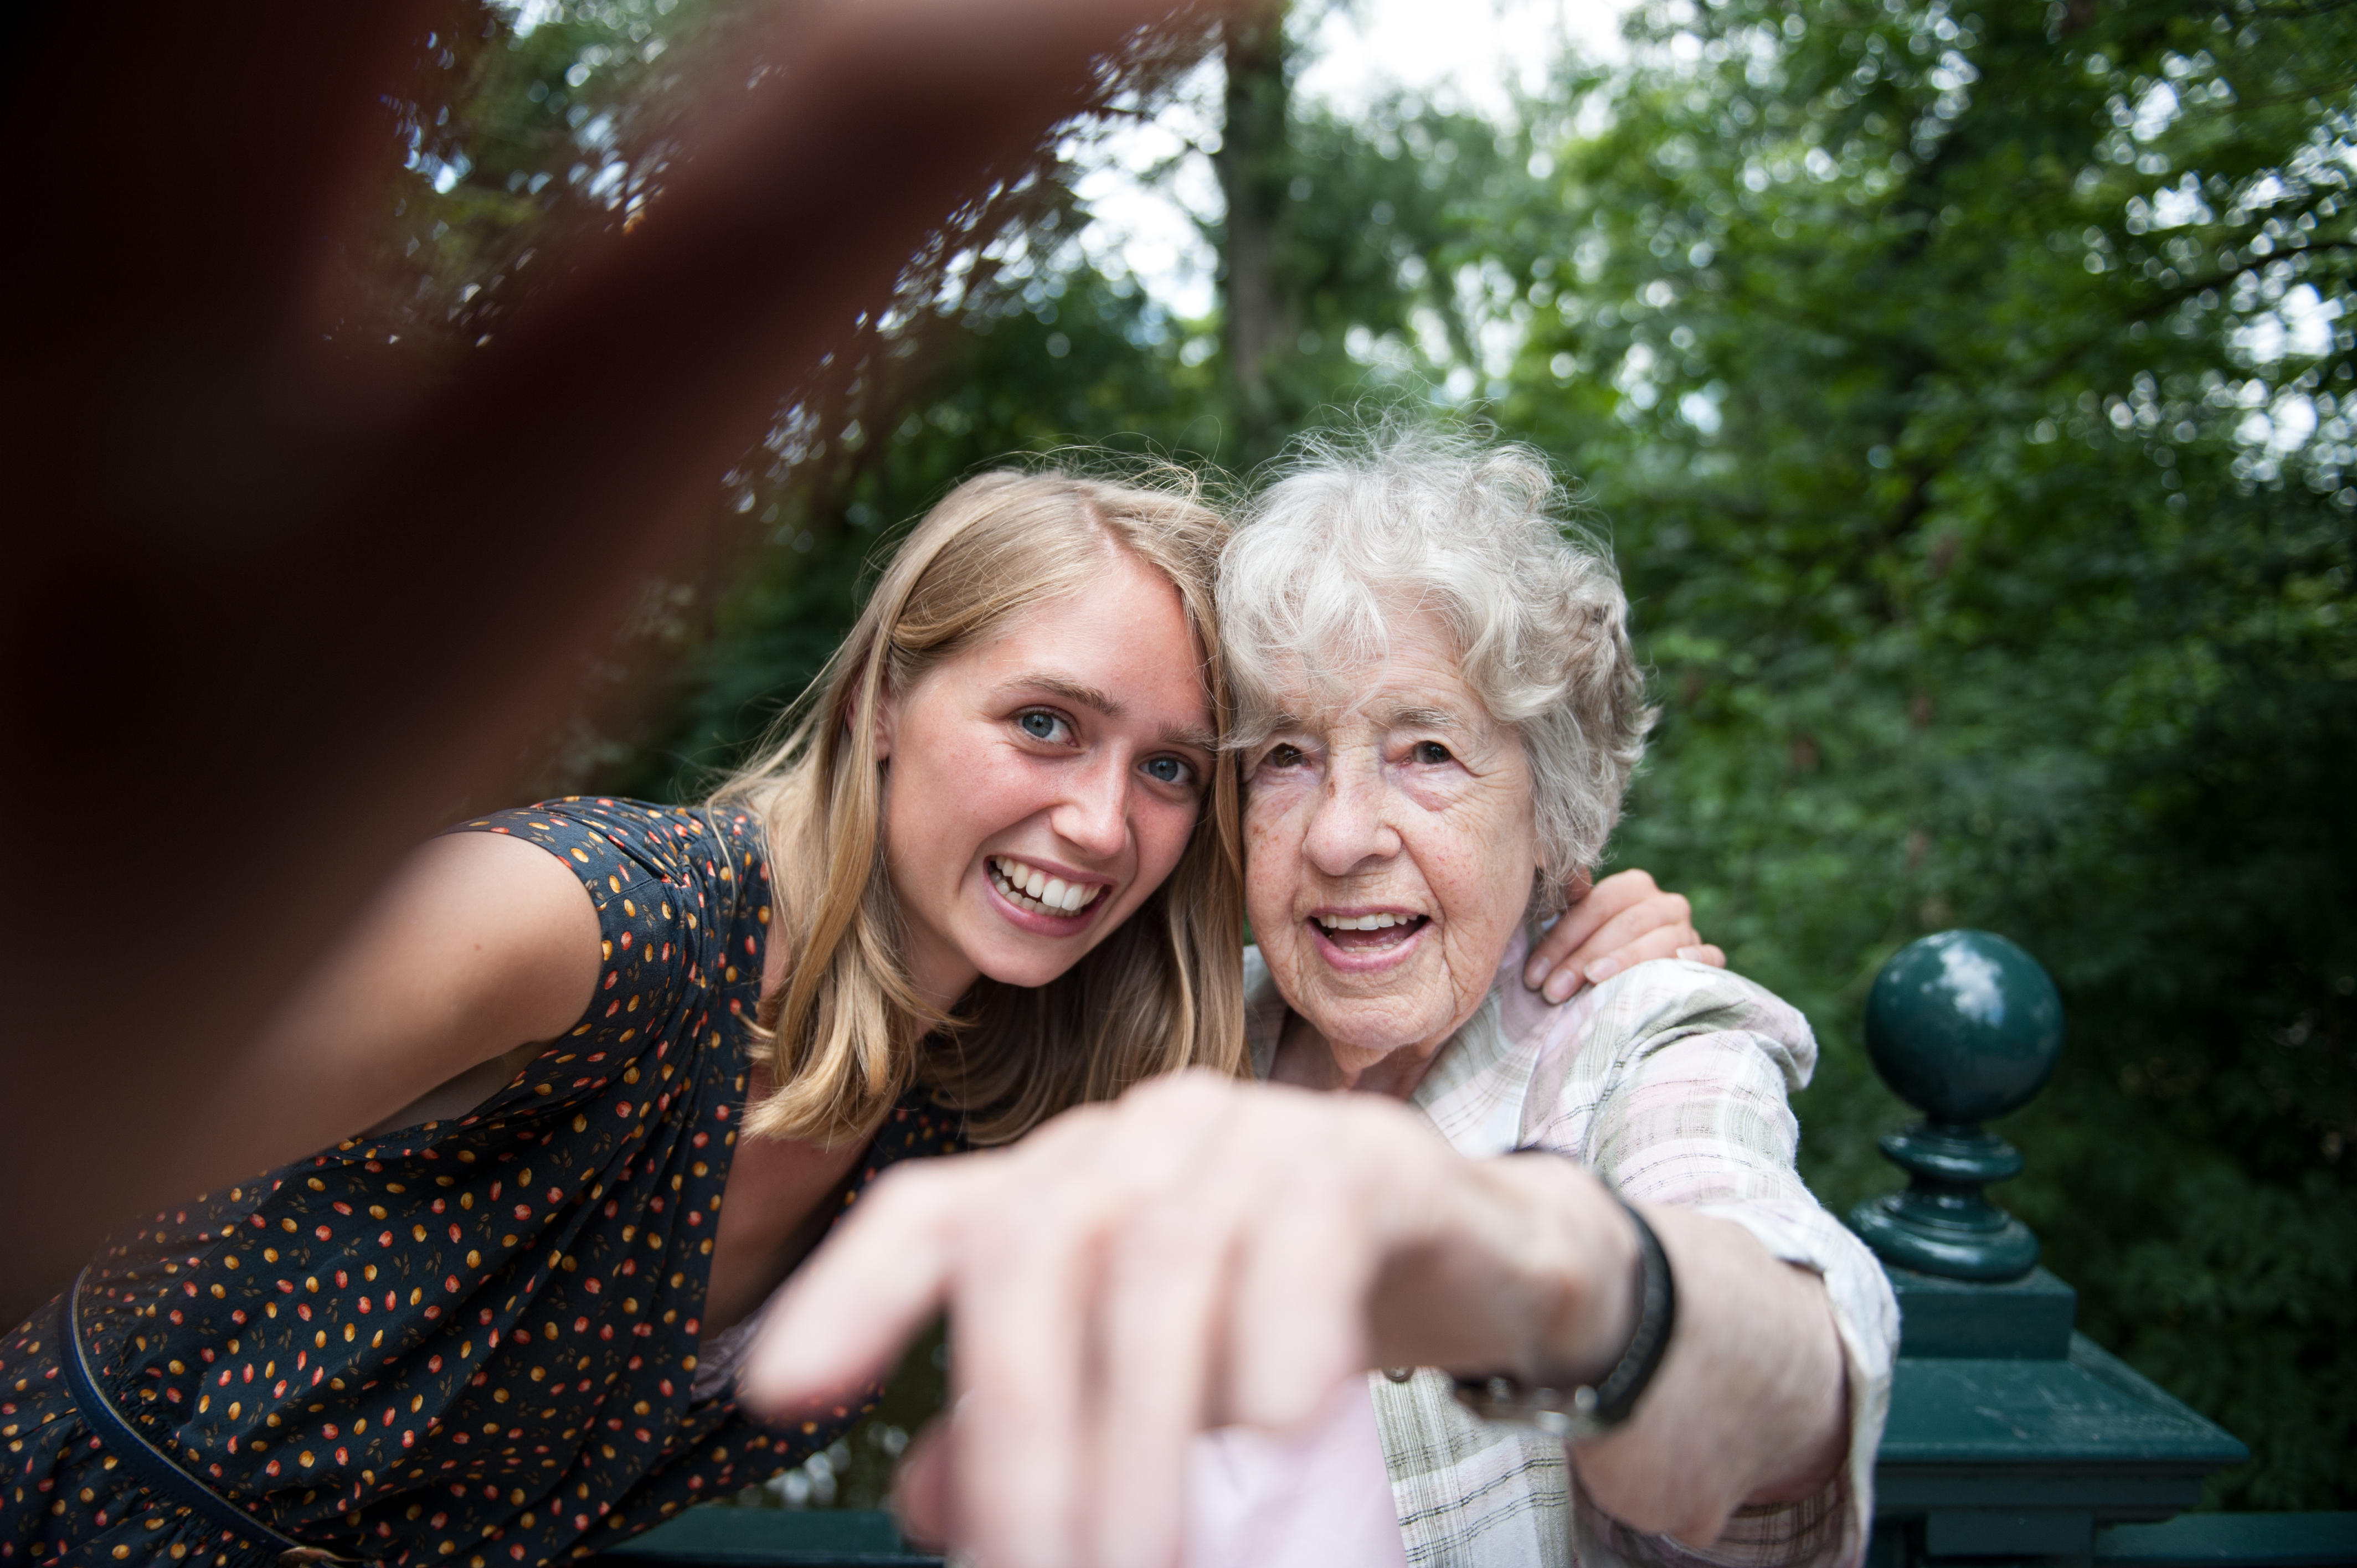 Senior (98) lady and young woman making a selfie | Source: Getty Images